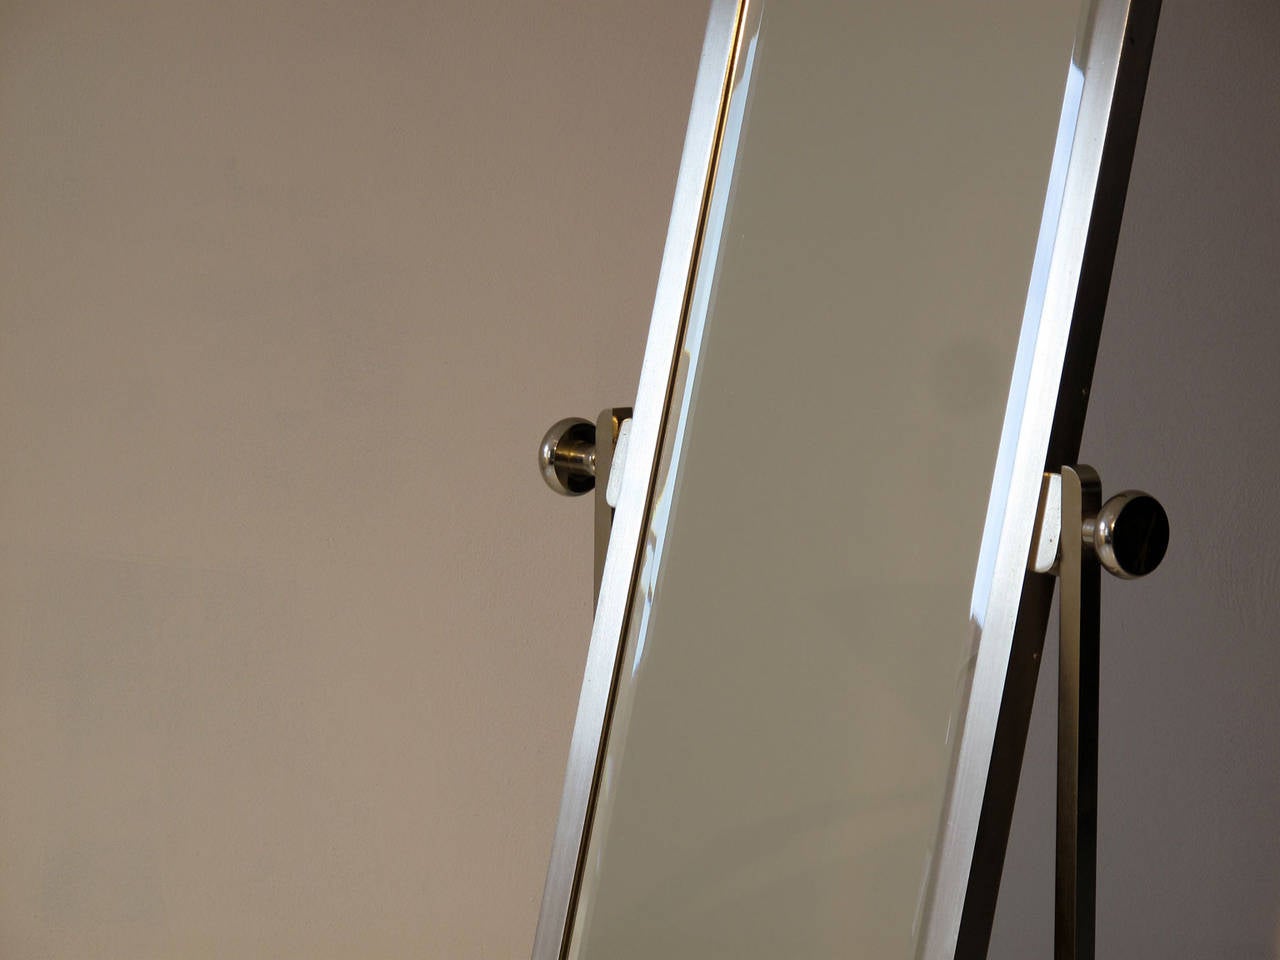 Mid-Century Modern, 1950s aluminum frame standing mirror.
The old brass coating to the aluminum has almost vanished, leaving only a thin layer of golden patina on the frame, which gives the metal an almost white golden color. The mirror itself is